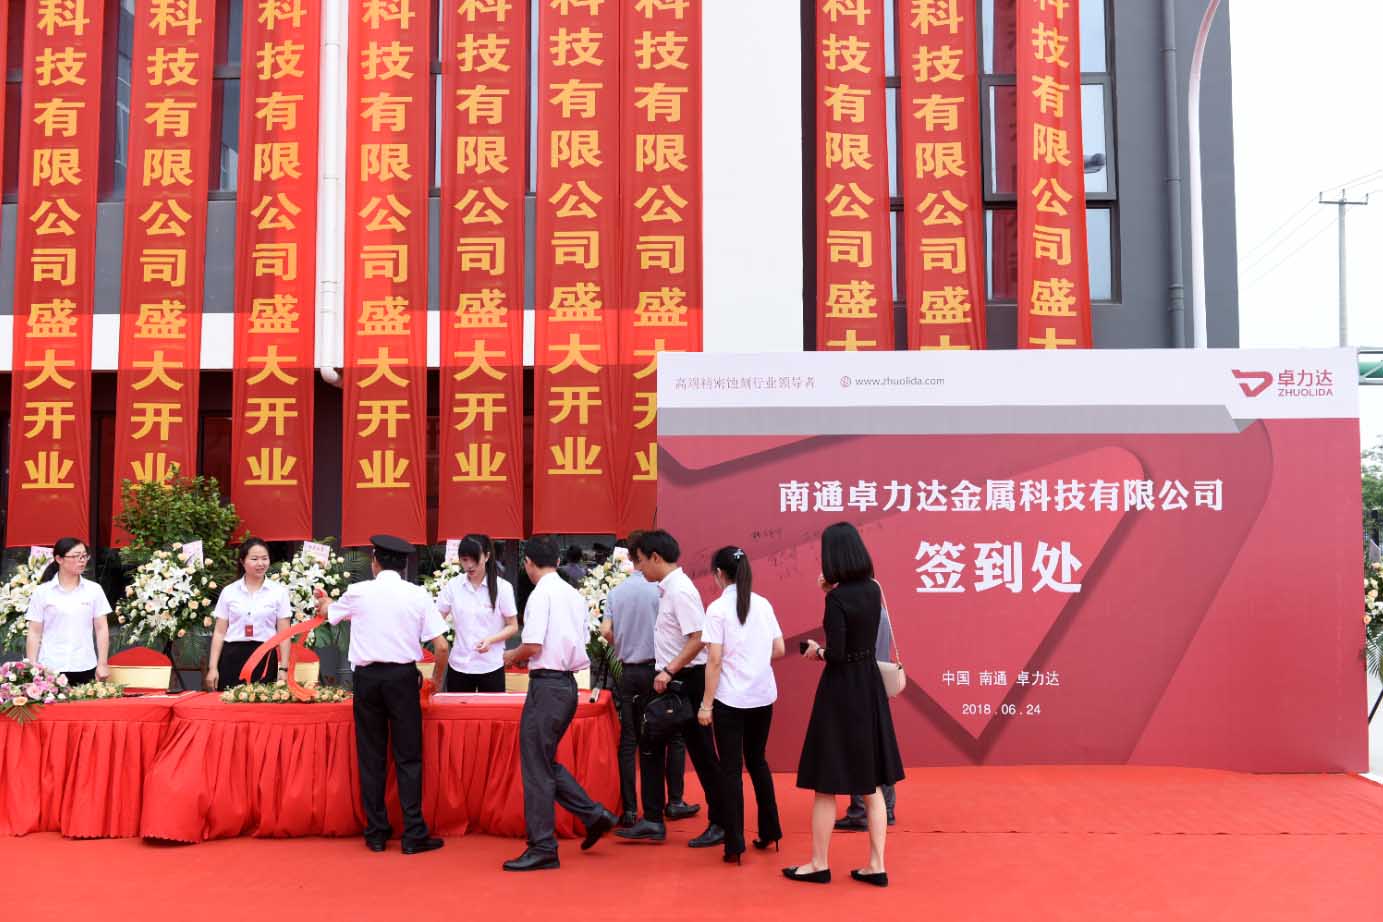 Opening review | warmly celebrate the grand opening of nantong zhuolida metal technology co., LTD. 